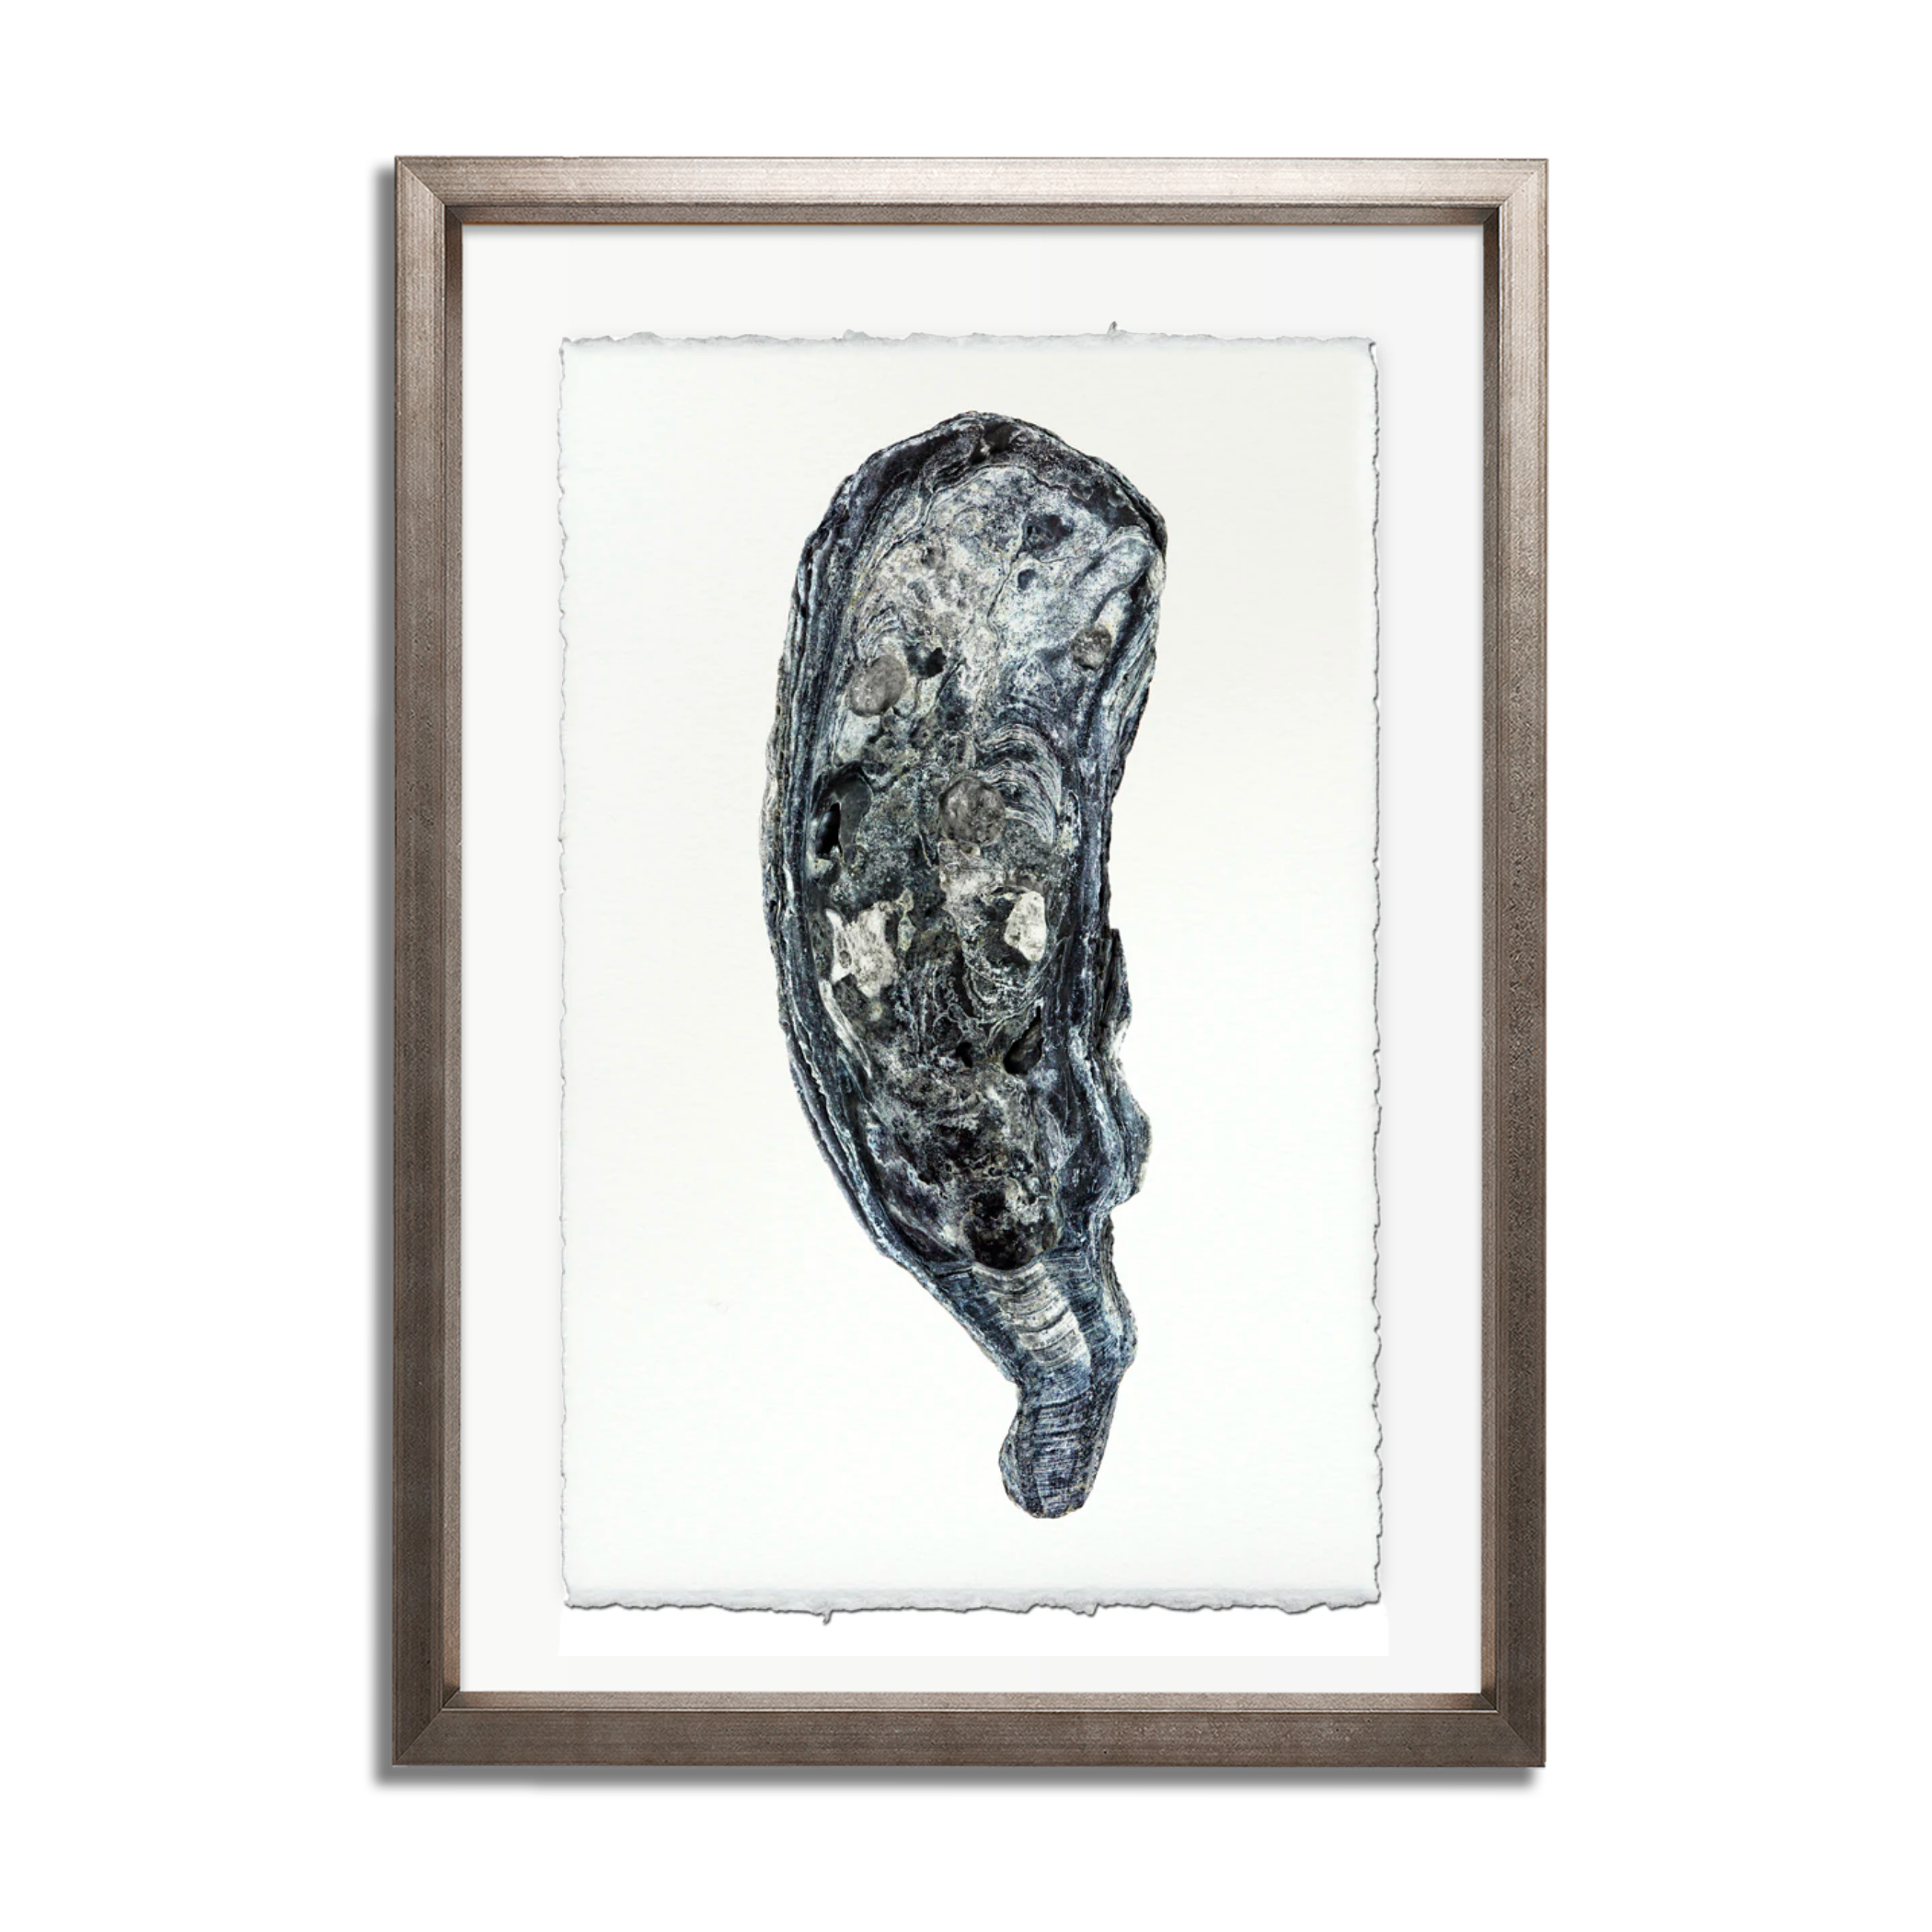 Oyster Study #7